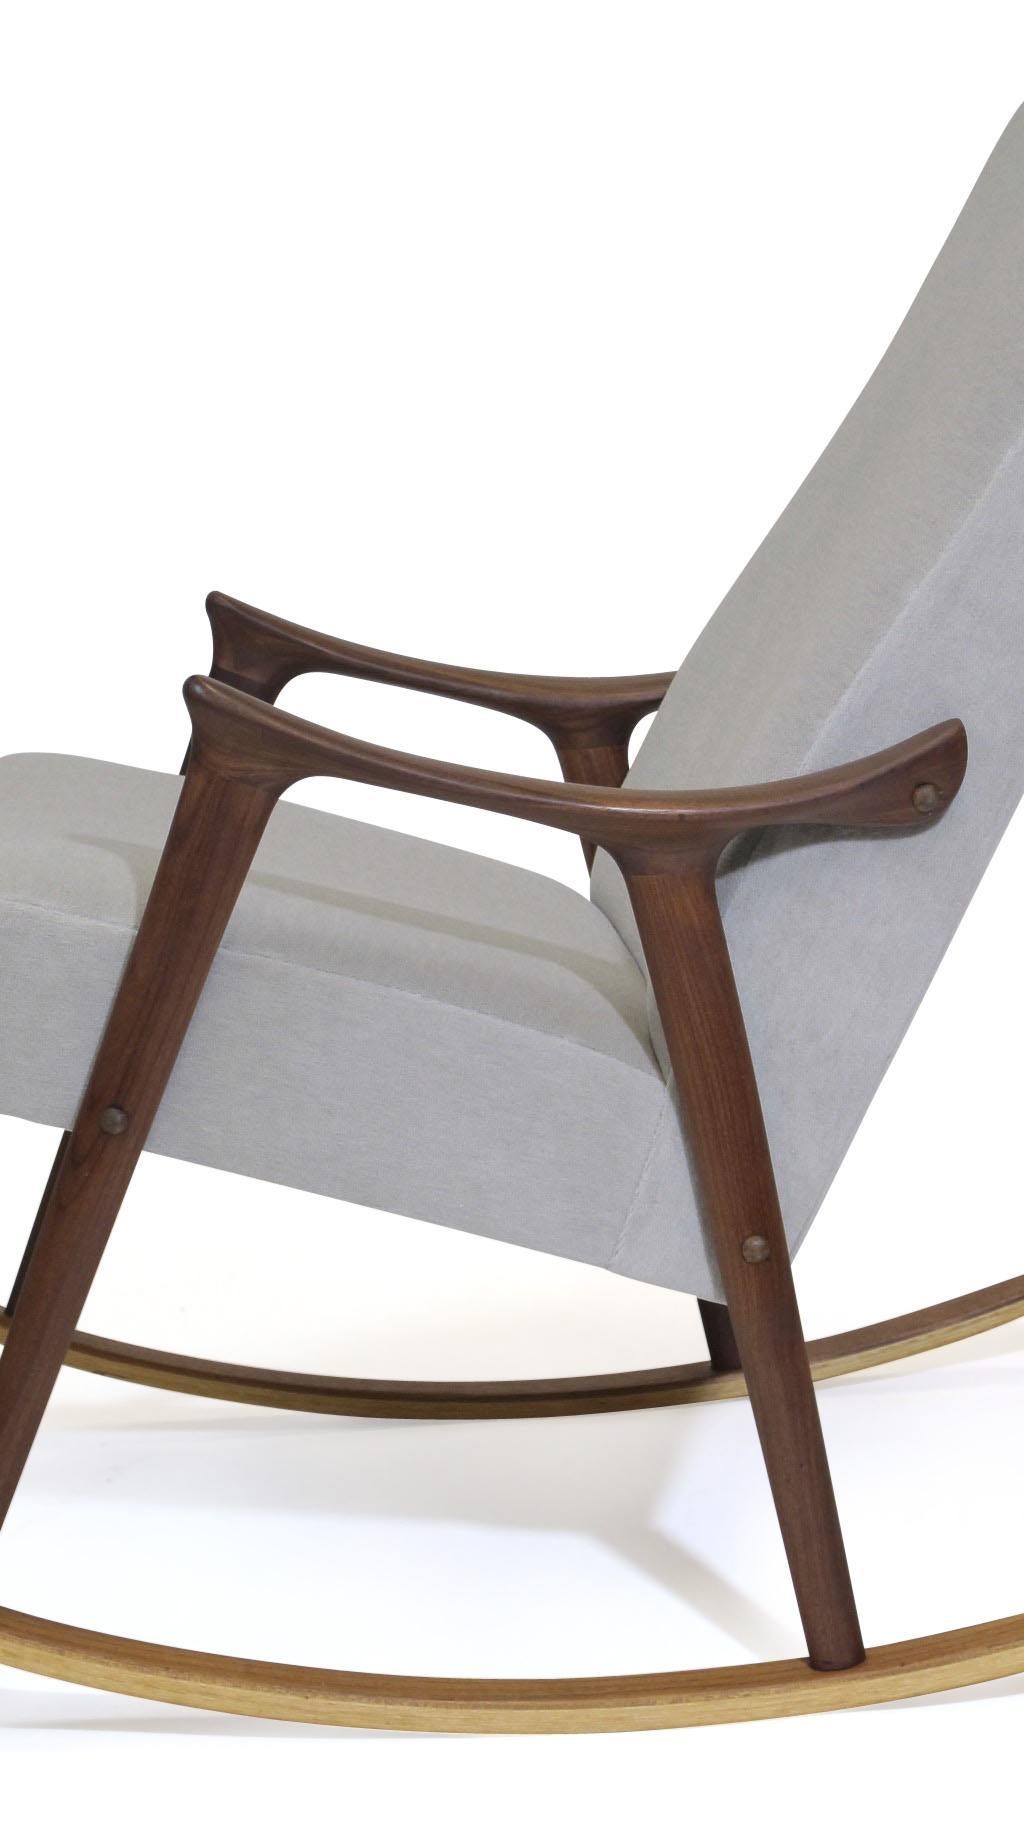 High-back rocking chair designed by Ingmar Relling crafted of a solid teak wood frame with sculpted arms, newly upholstered in off-white alpaca mohair.